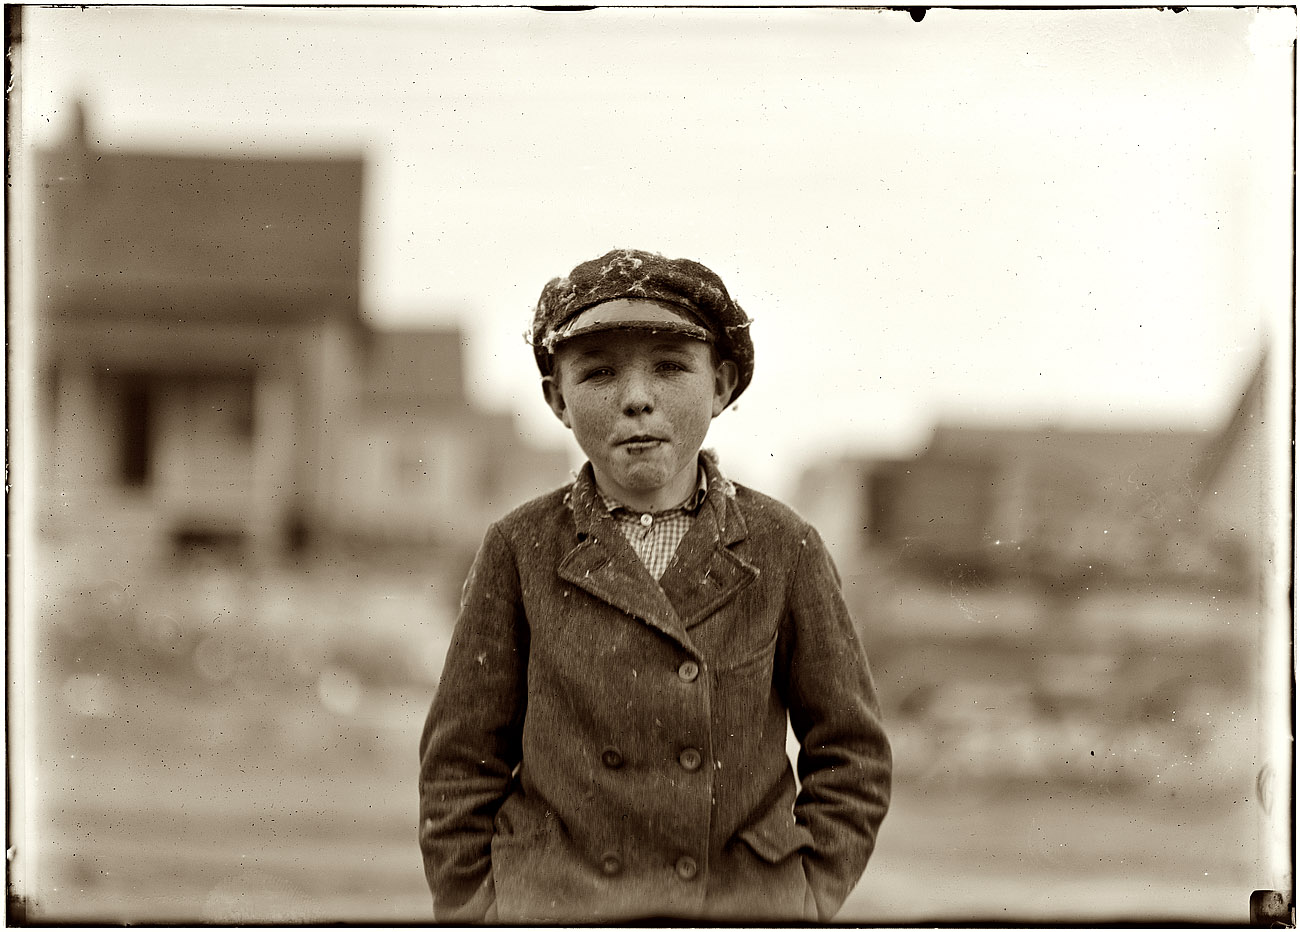 October 1908. Gastonia, North Carolina. Boy from Loray Mill. "Been at it right smart two years." View full size. Photograph by Lewis Wickes Hine.